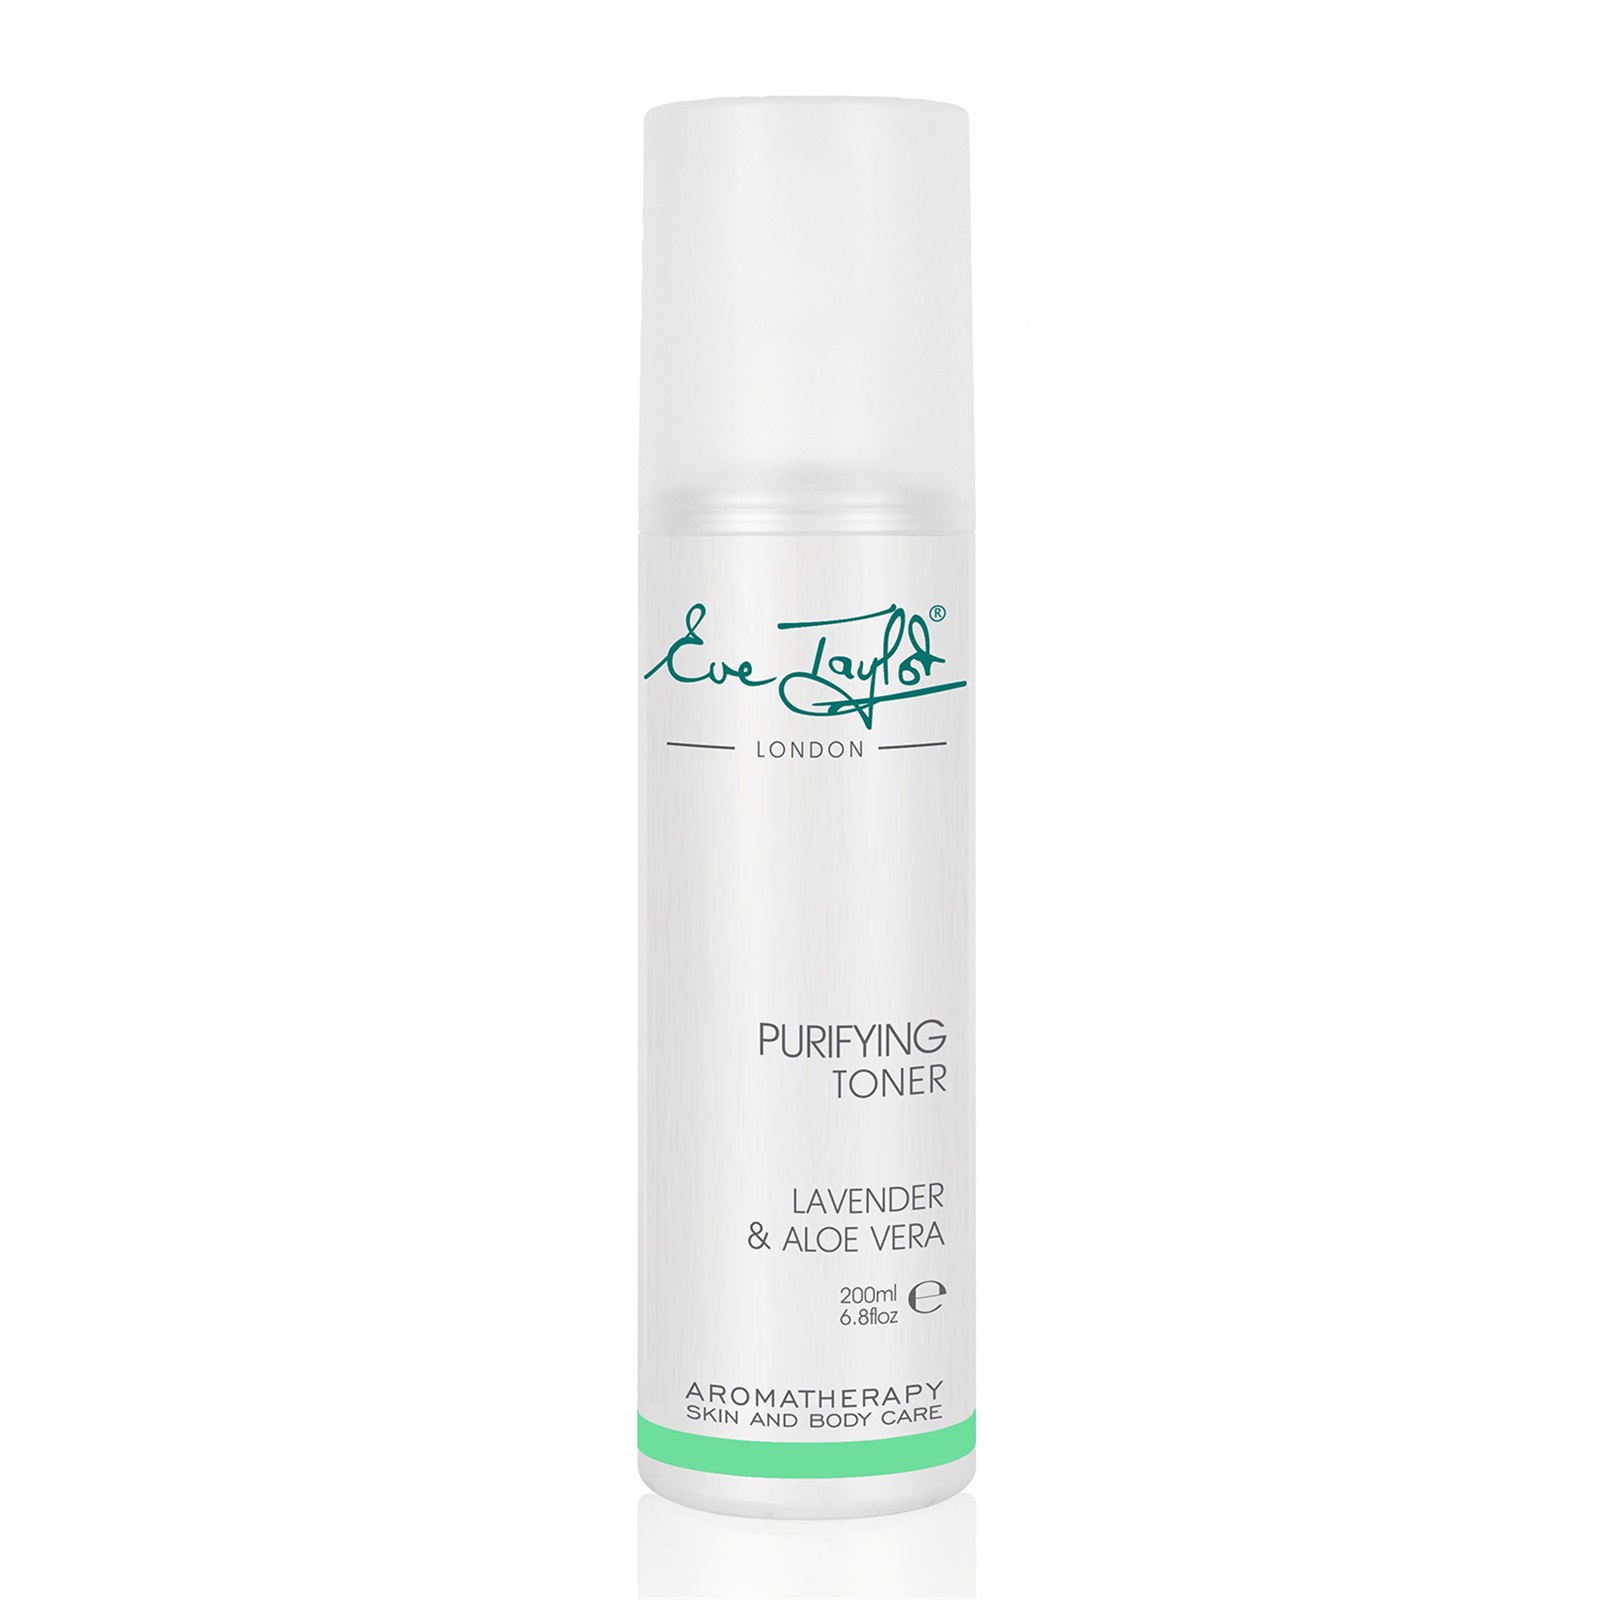 Purifying Toner 200ml 's Featured Image